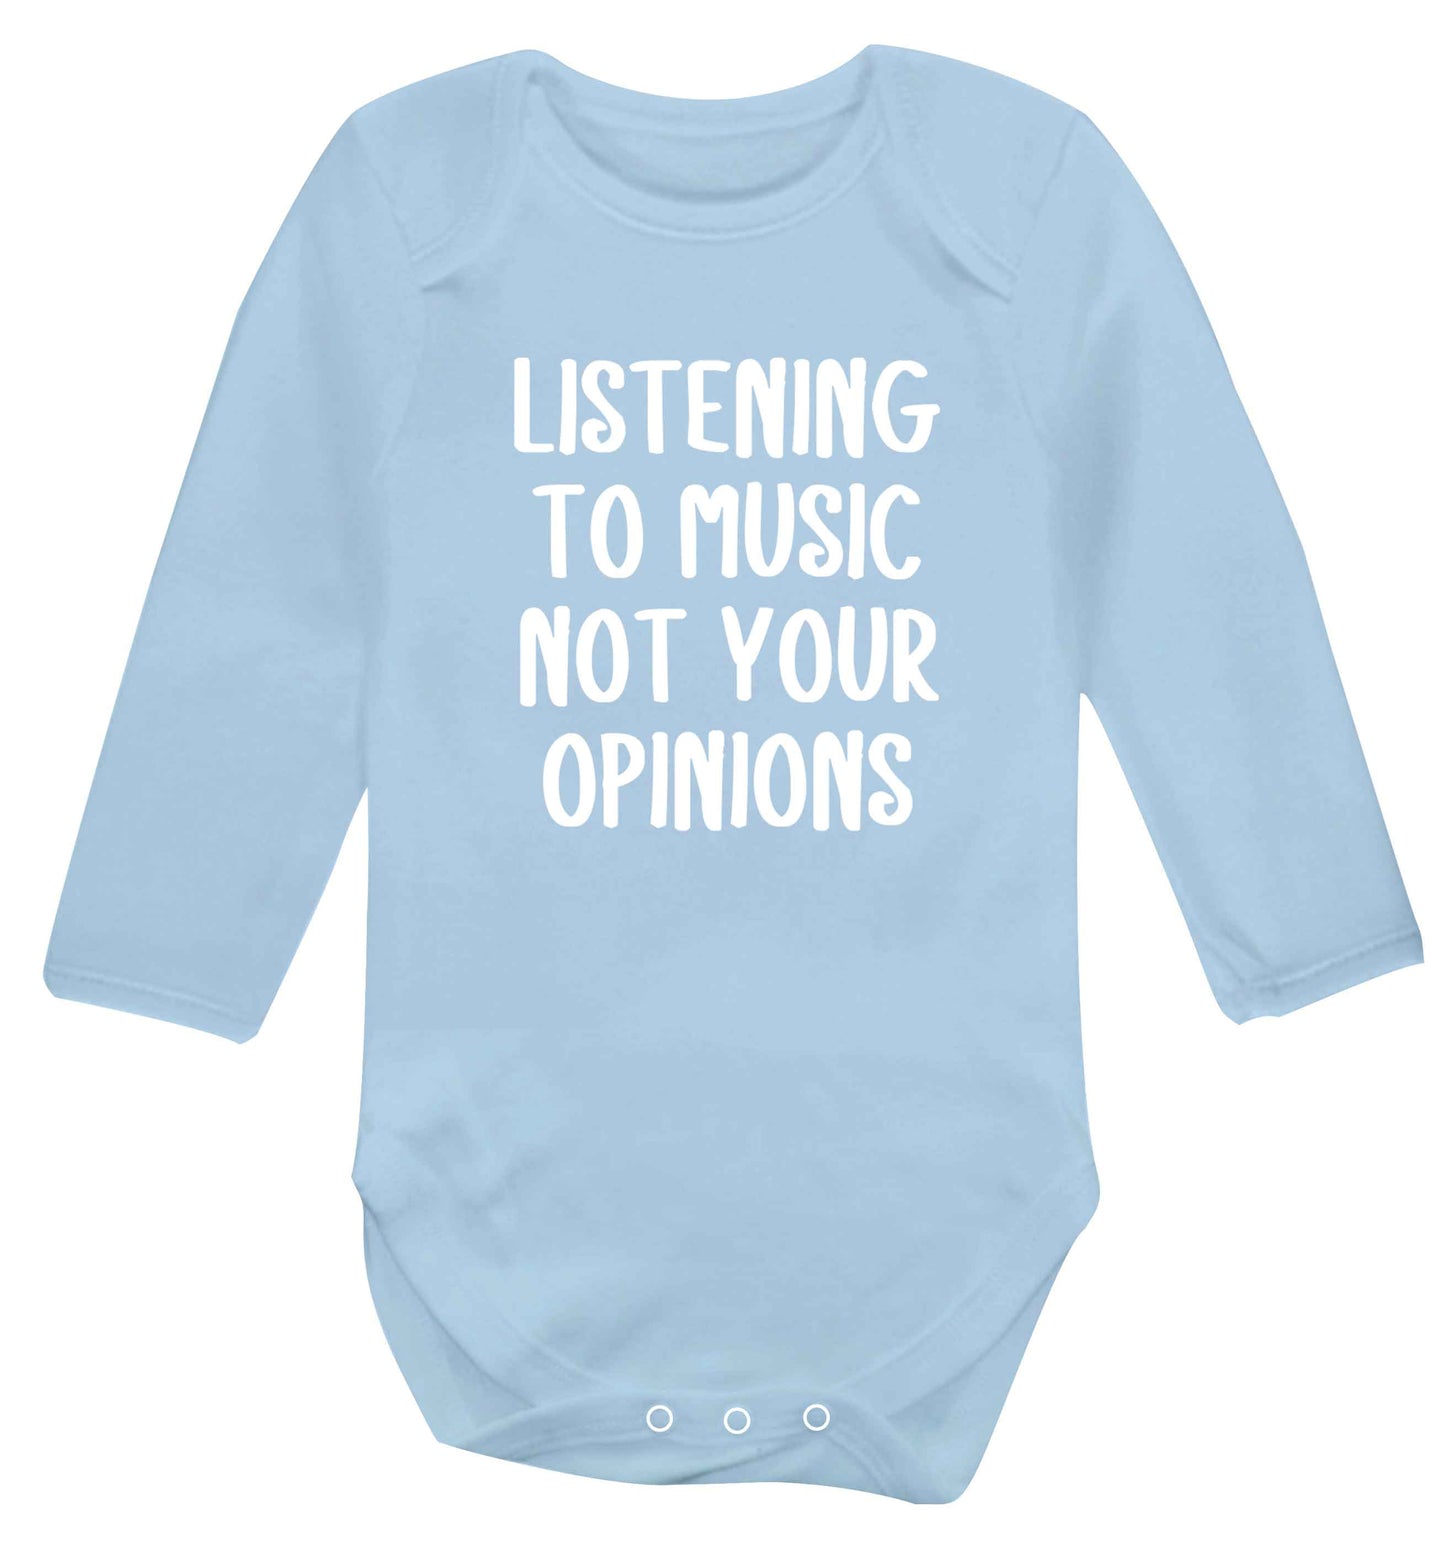 Listening to music not your opinions baby vest long sleeved pale blue 6-12 months